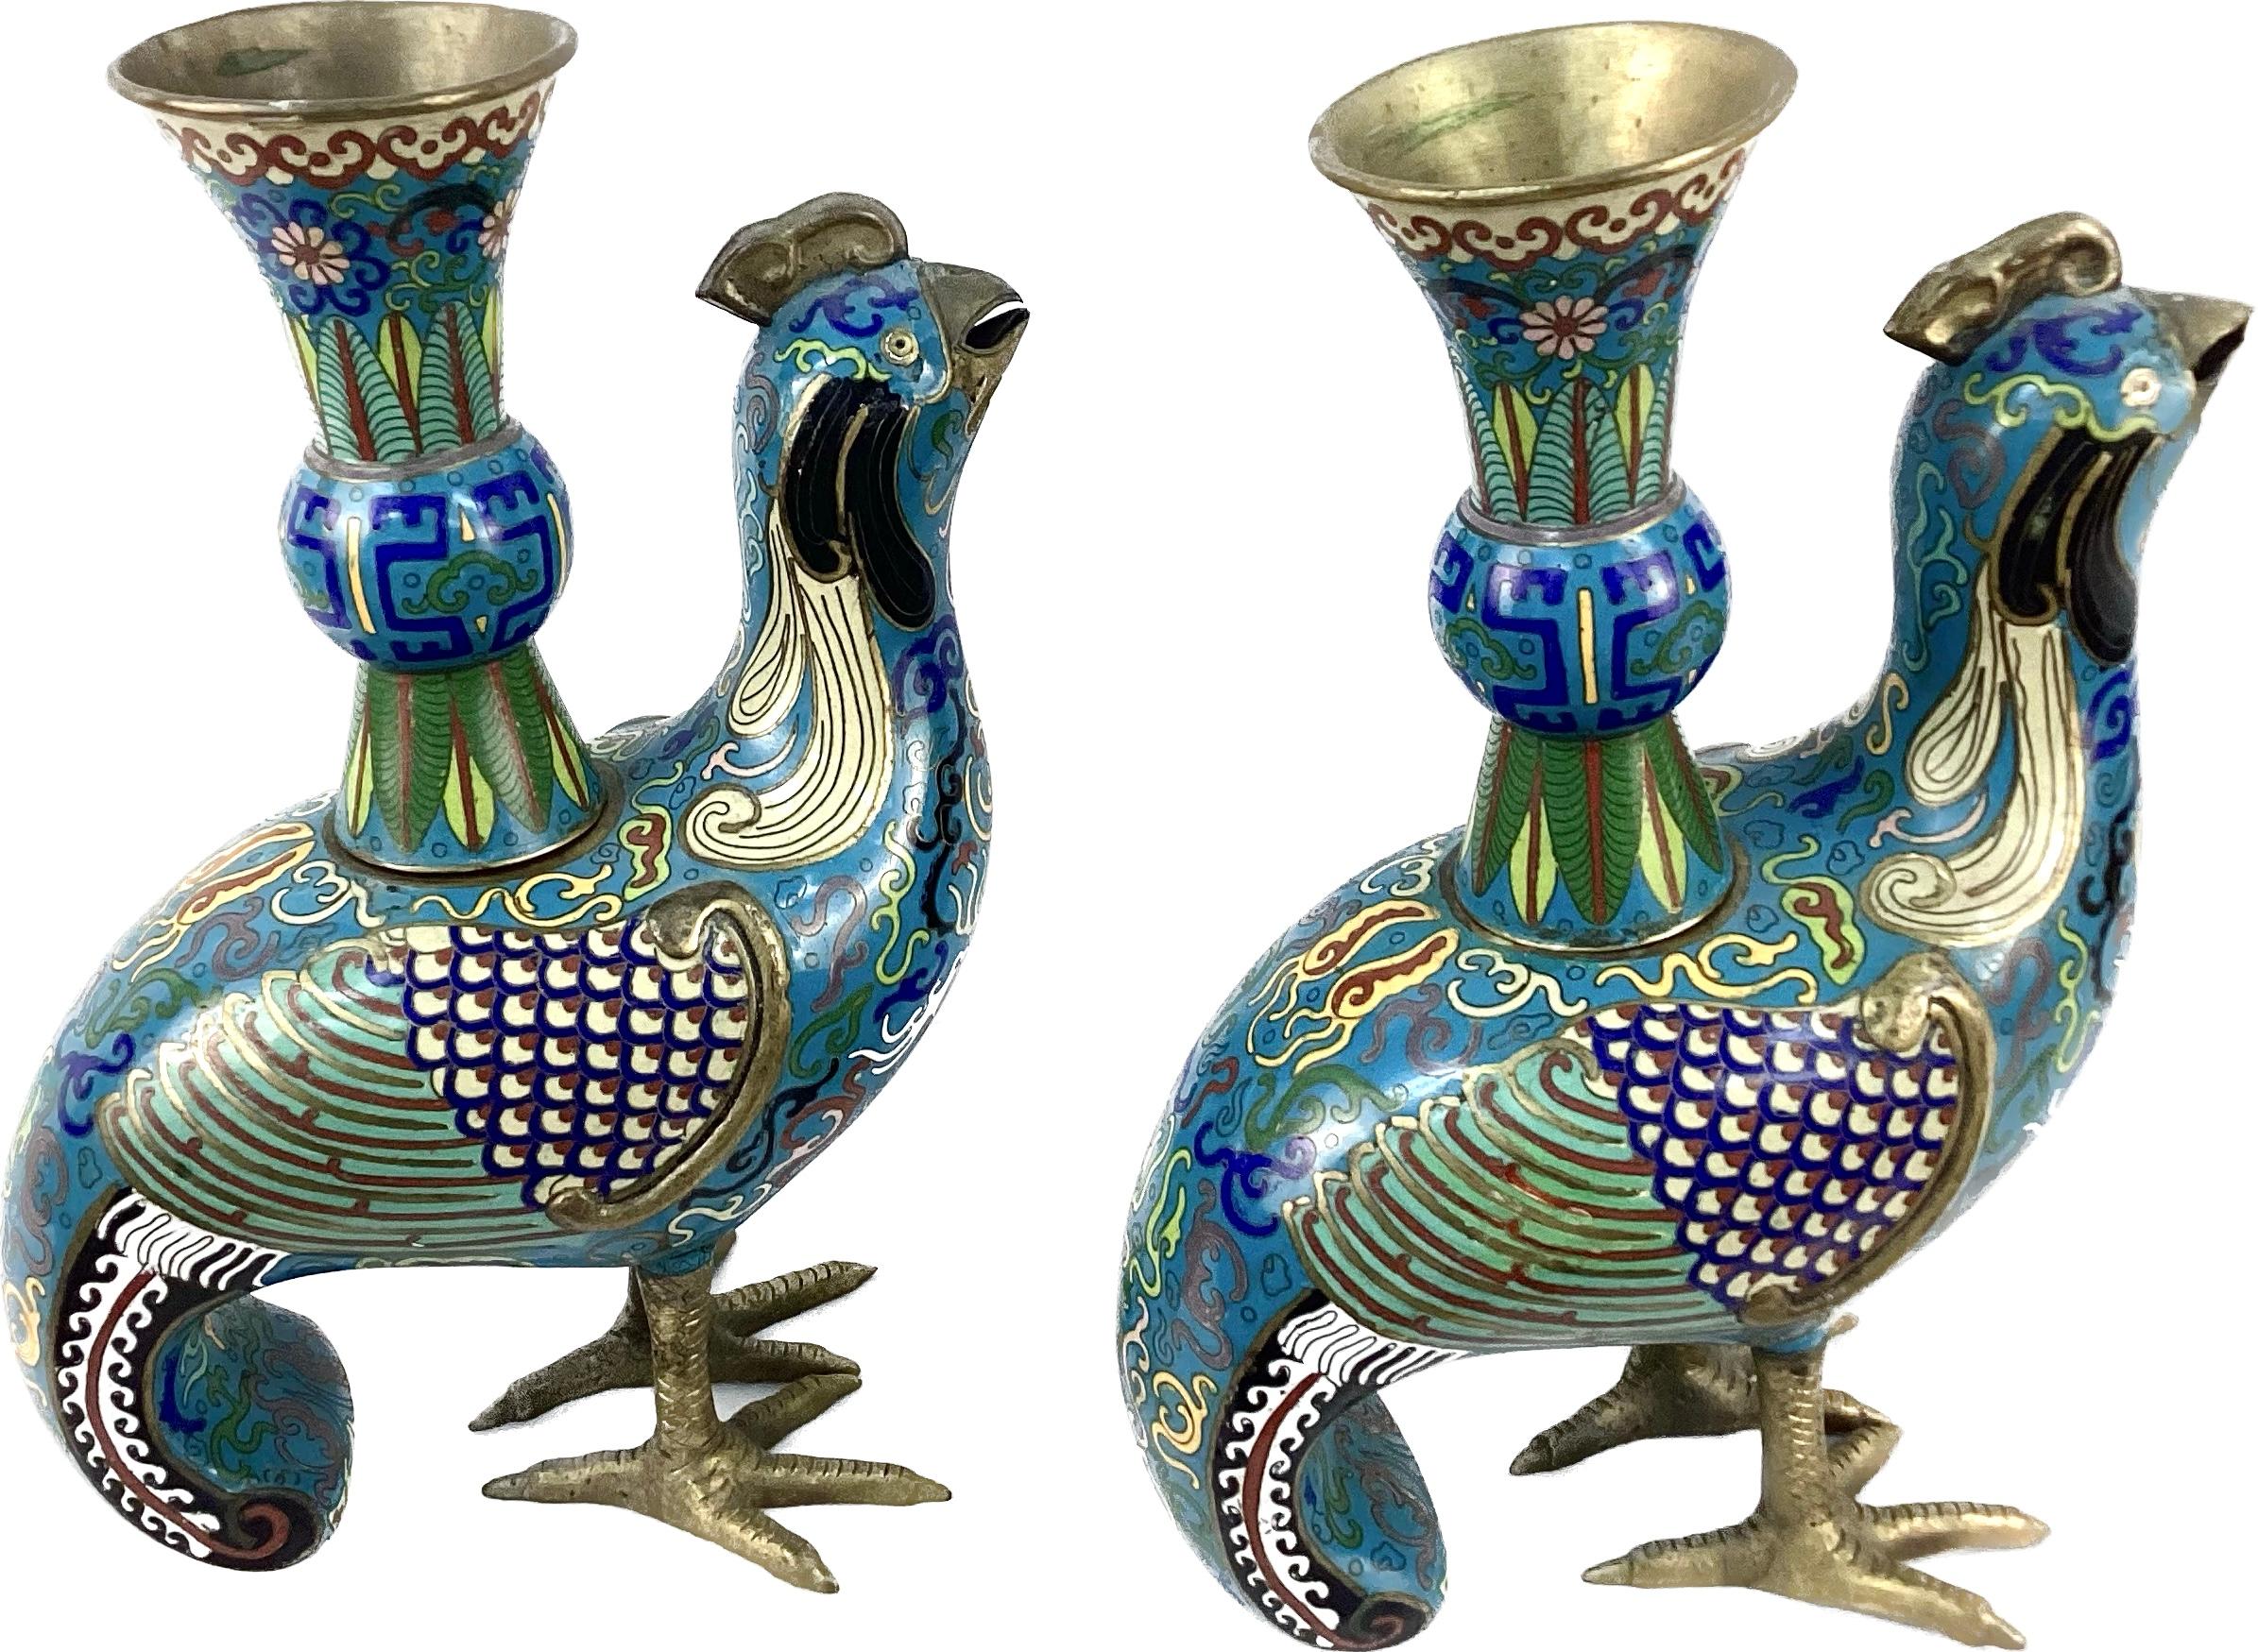 Pair of matching polychrome Archaic style Cloisonne birds each featuring an archaic design and decorated in blue, green and multi colors. Each bird has fan-shaped feathers and scrolling designs throughout down to beautifully curved tails. Each